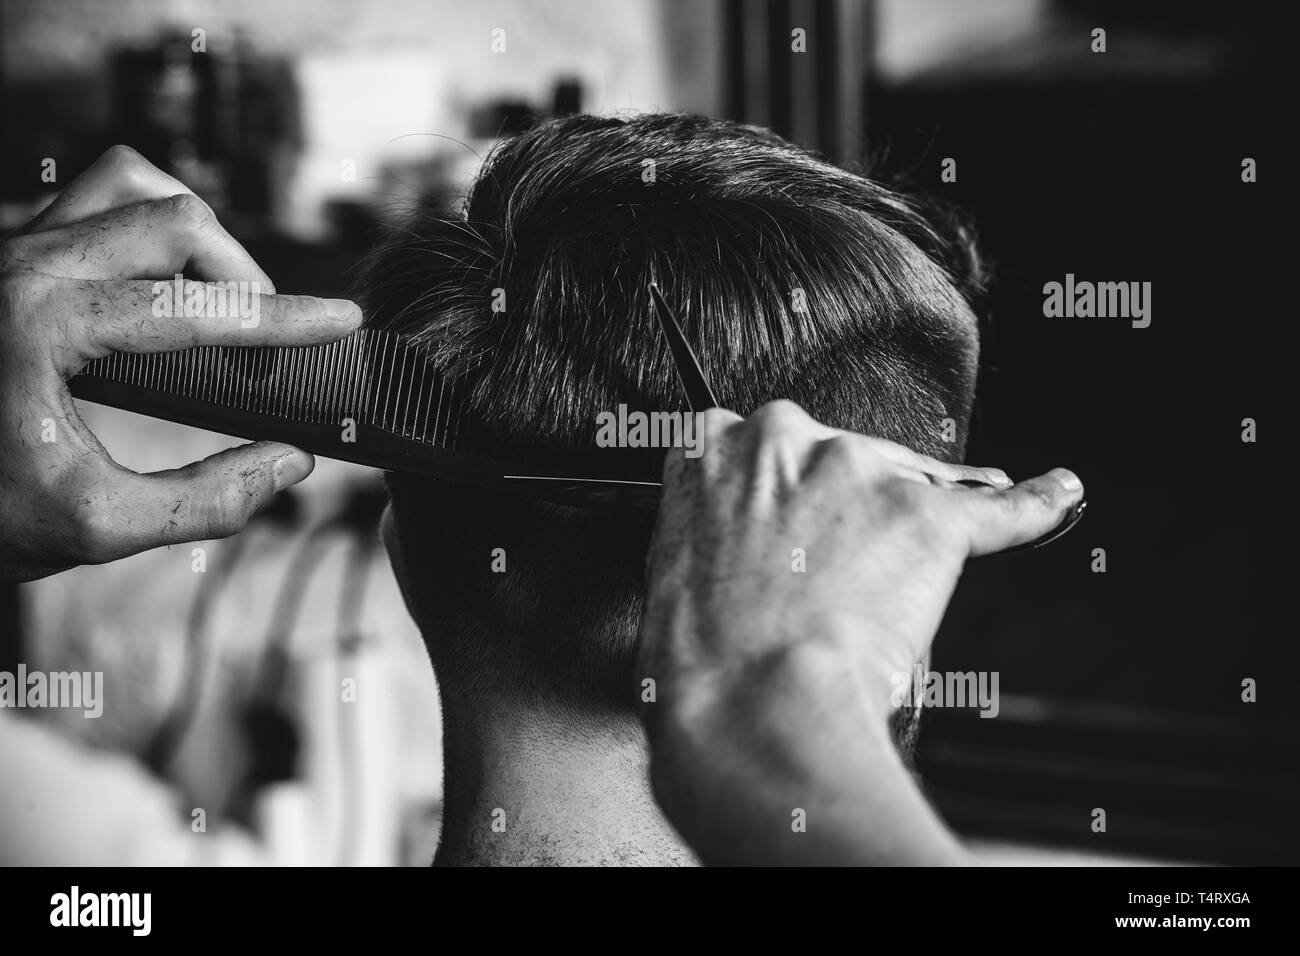 Young handsome barber making haircut for attractive bearded man at barbershop. Black and white or colorless photo. Hairstyle, salon, hairdresser, barber shop, lifestyle concept. Caucasian male models. Stock Photo